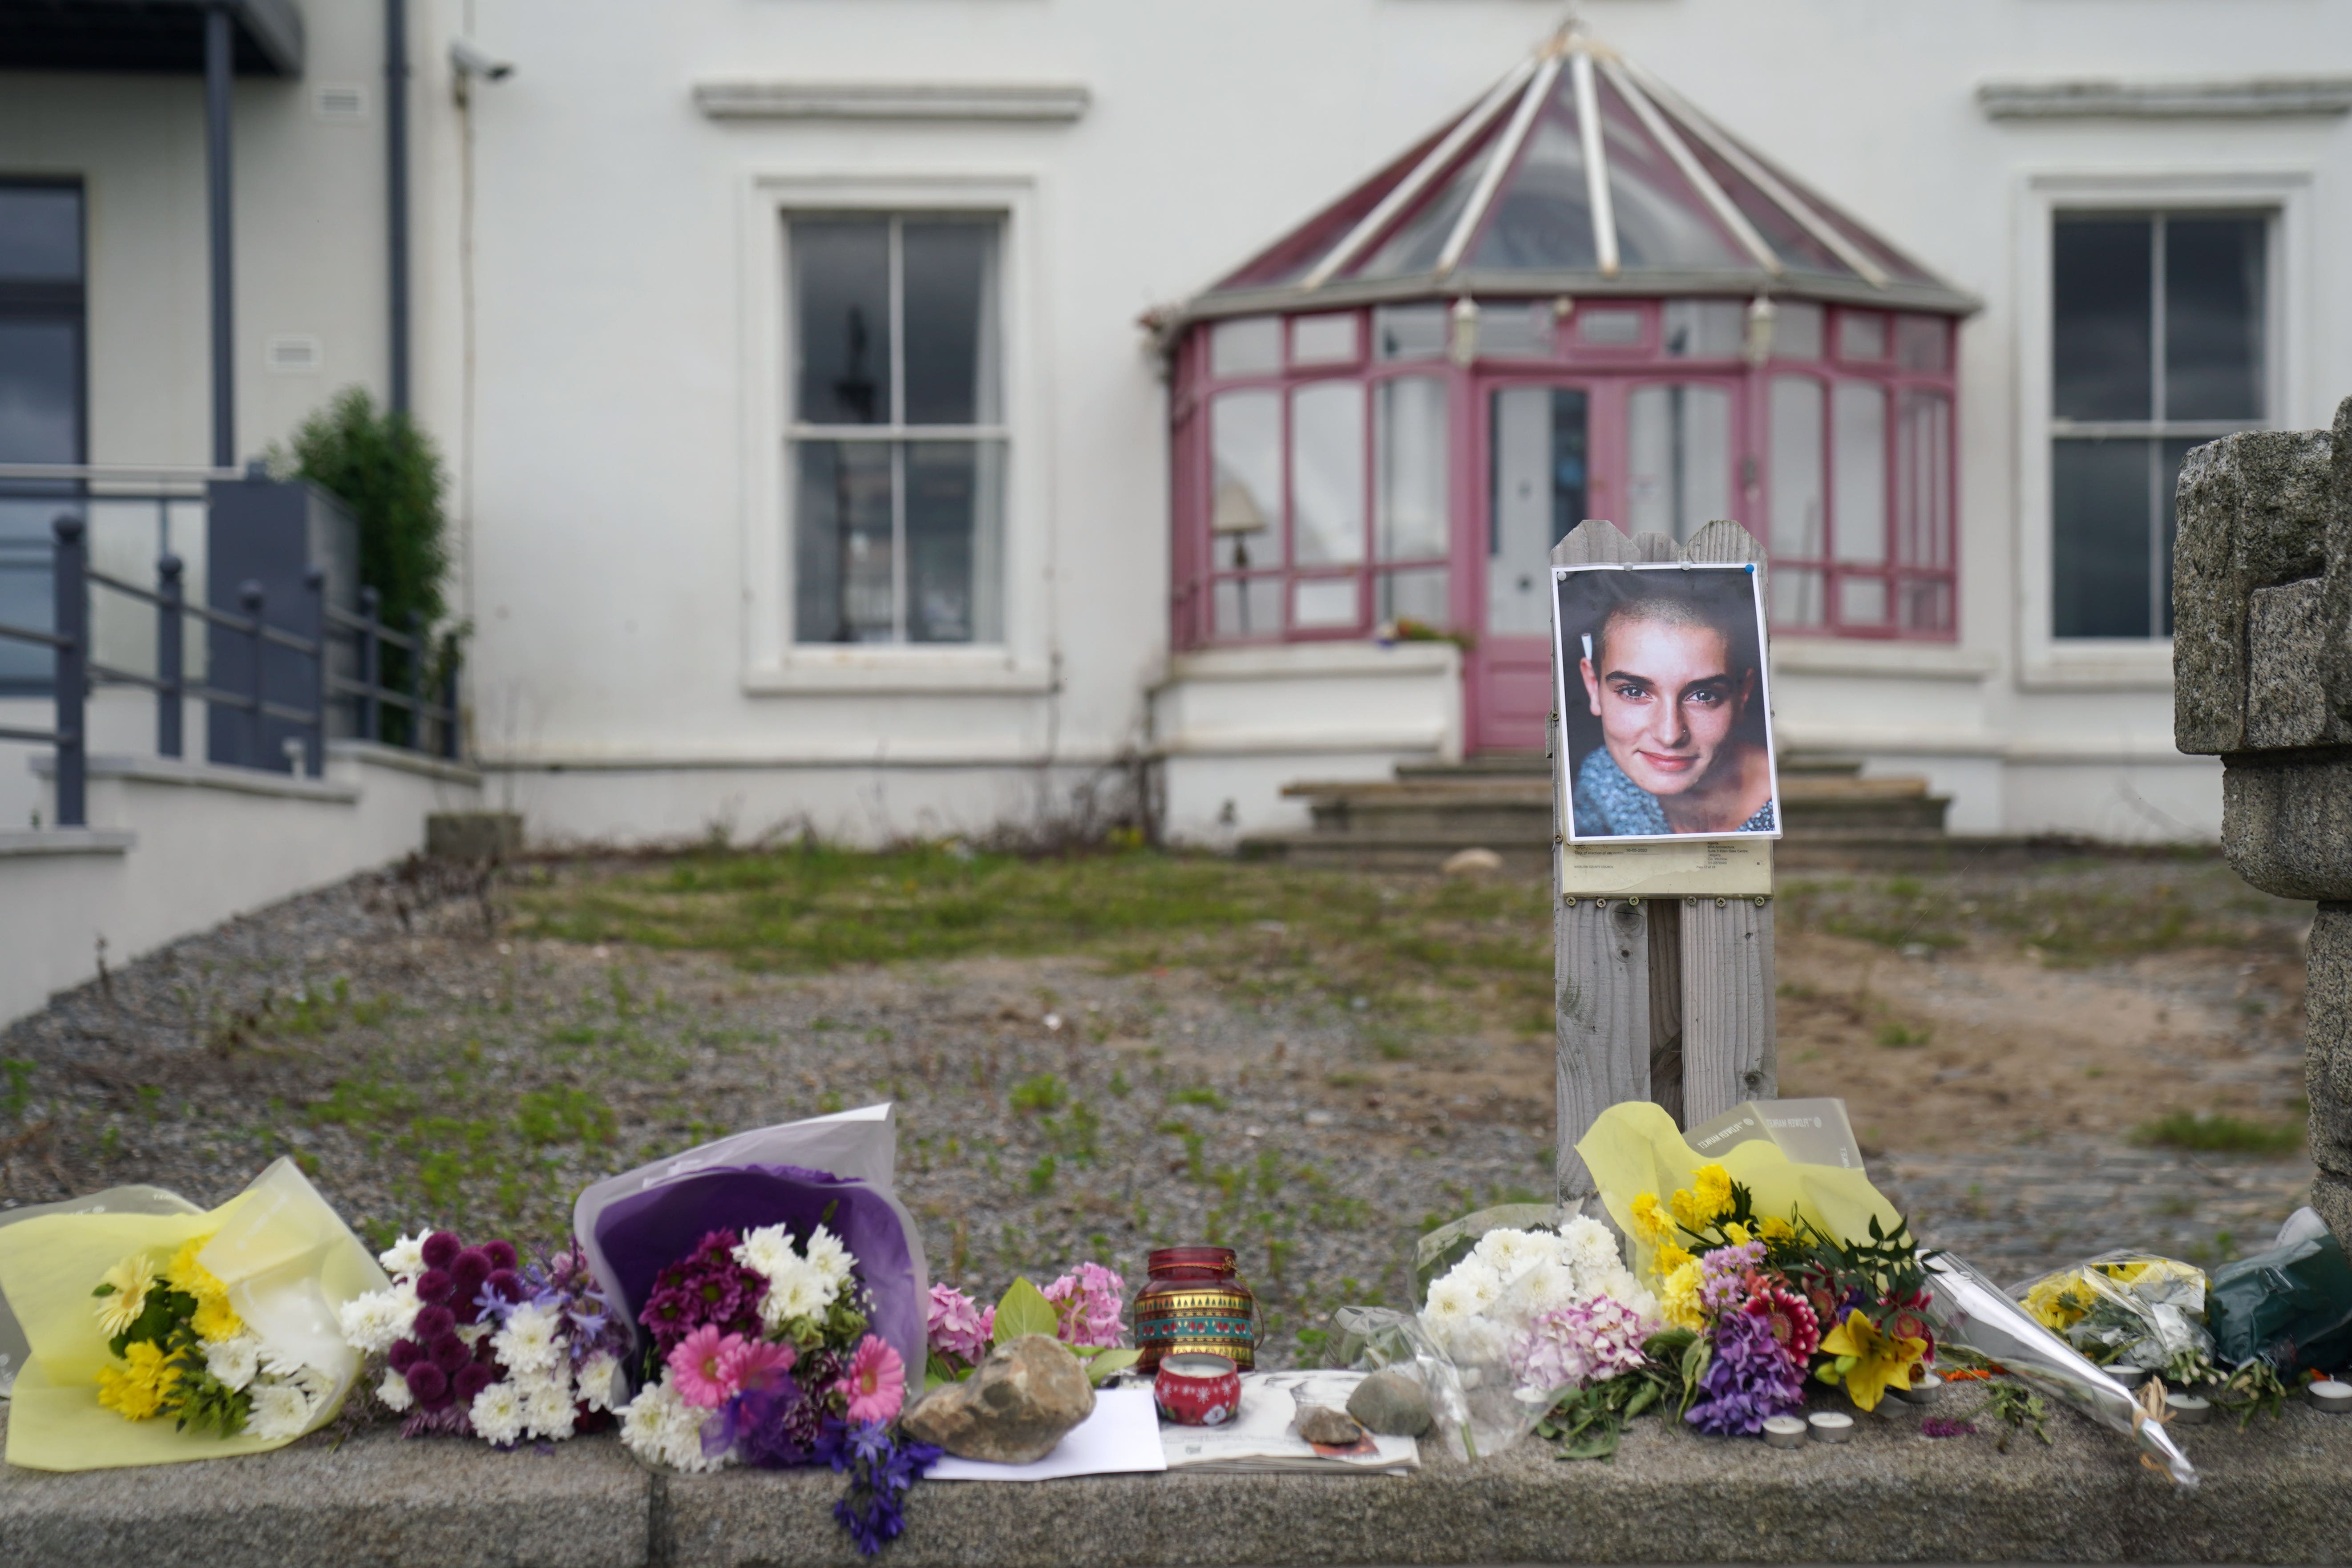 Floral tributes laid outside Sinead O’Connor’s former home in Bray (Brian Lawless/PA)